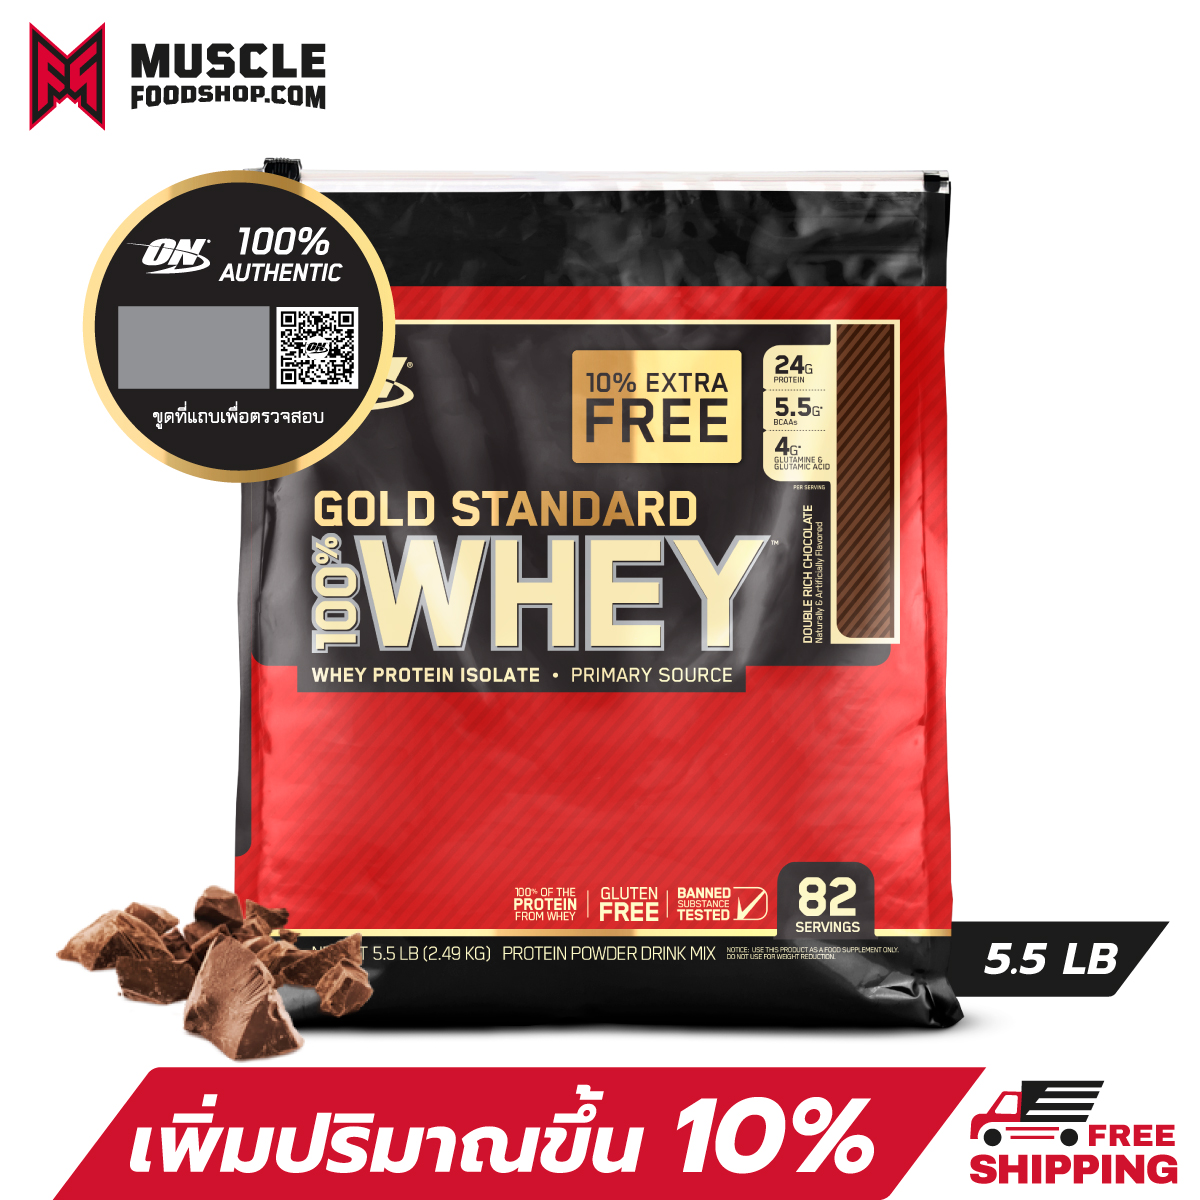 Optimum Nutrition Whey Protein Gold Standard 5.5 Lbs. - Double Rich Chocolate เวย์โปรตีน เพิ่มกล้ามเนื้อ ลีนไขมัน